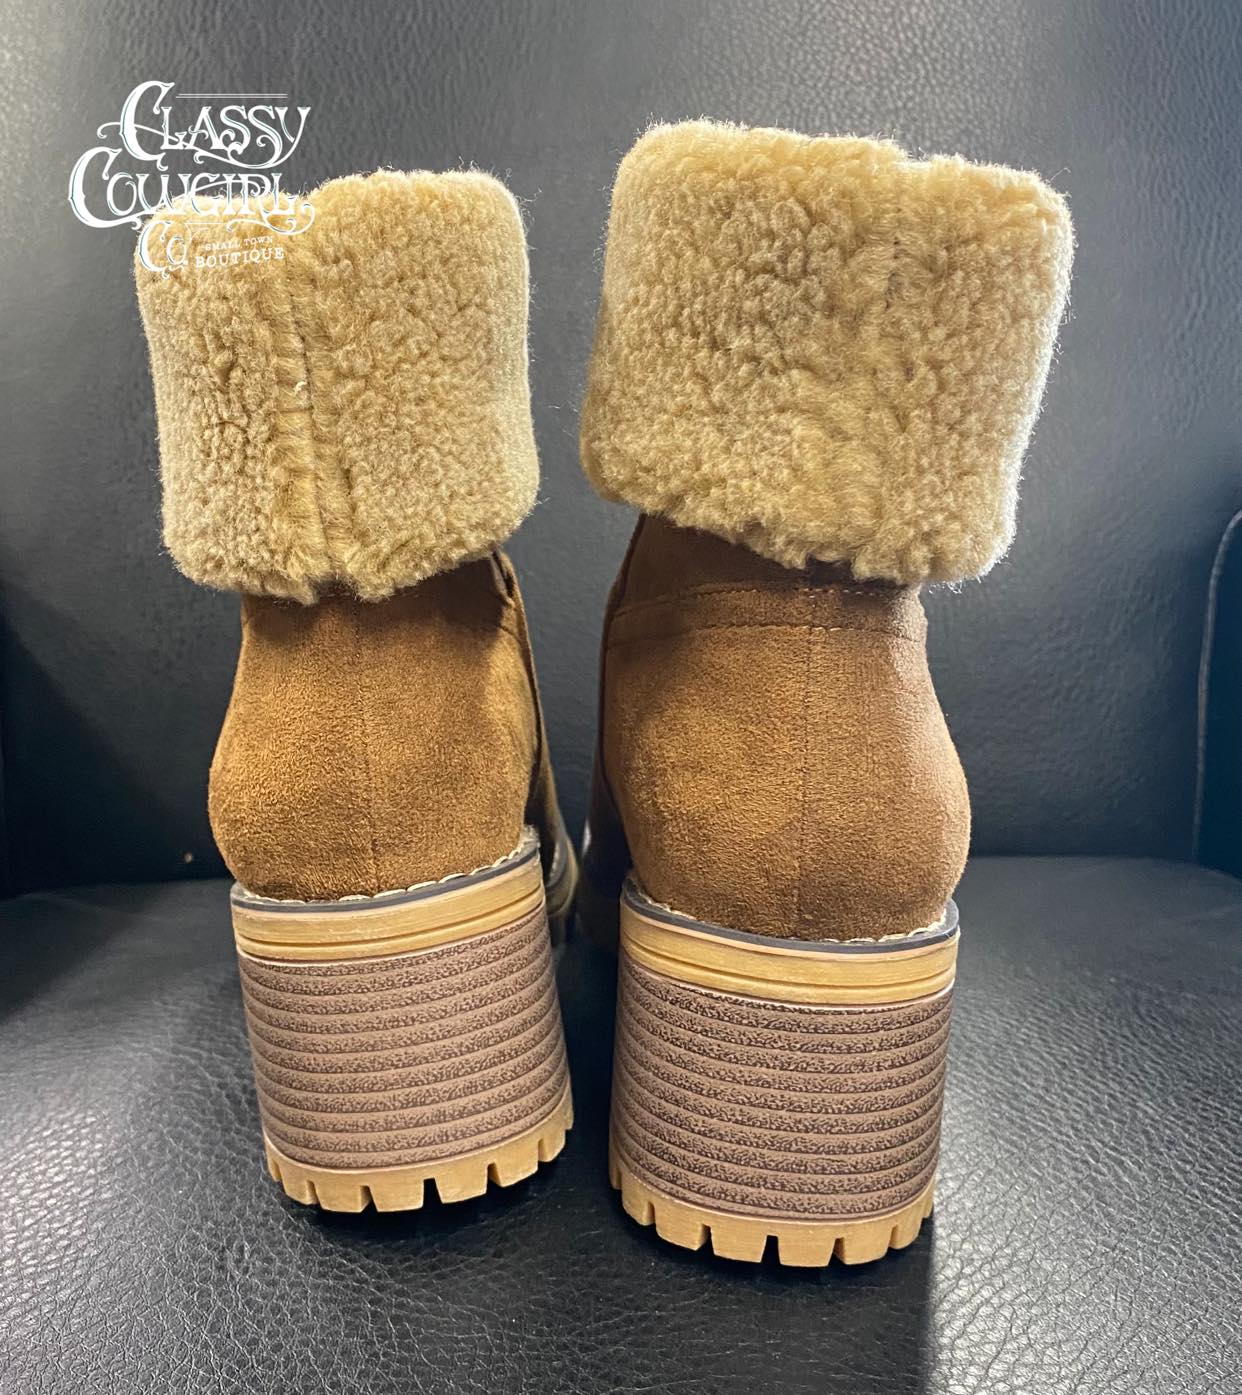 Corkys Tan Bootie with Sherpa/fur top- Corky's Cotton Bootie